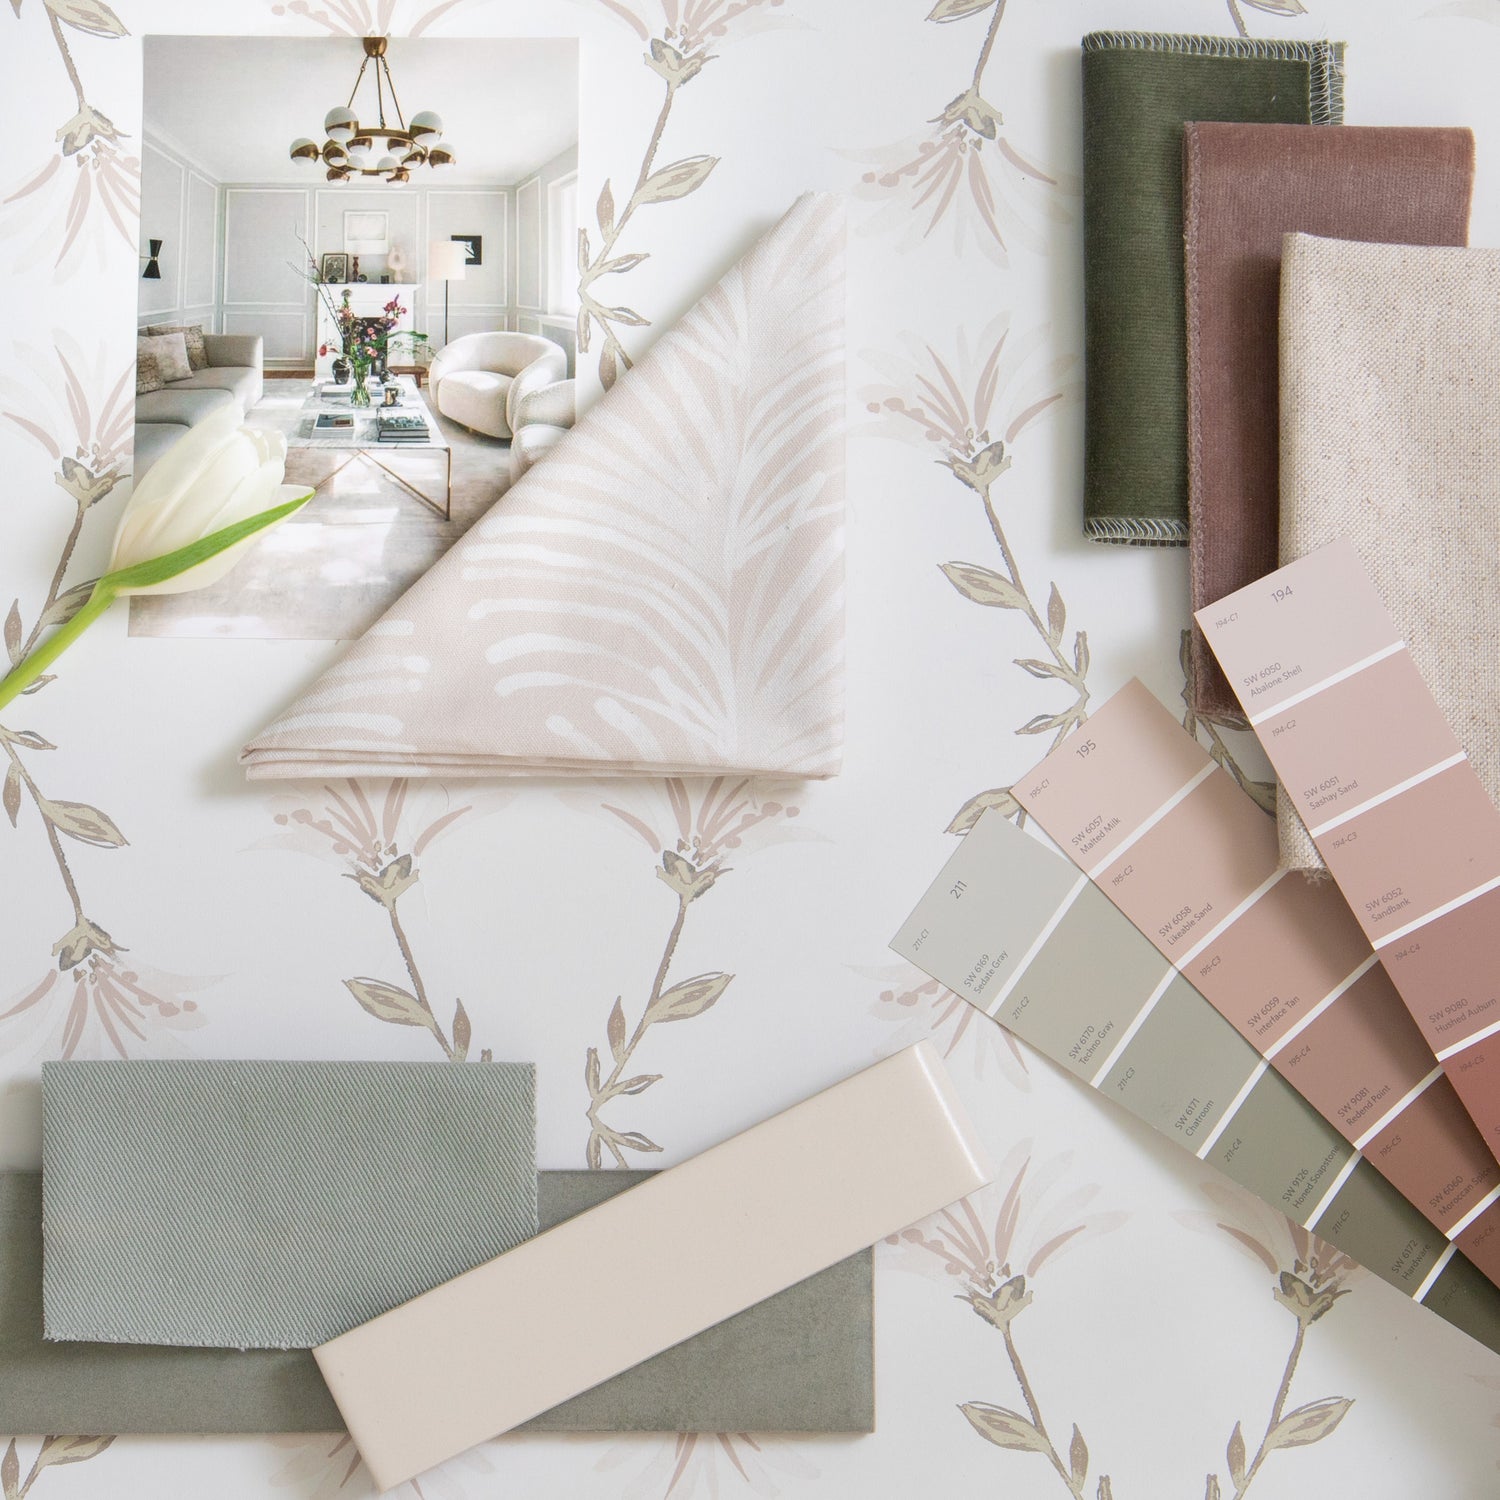 Interior design moodboard and fabric inspirations with Beige Botanical Stripe Printed Swatch, Fern Green Velvet Swatch, Mauve Velvet Swatch, and Cream Floral Wallpaper